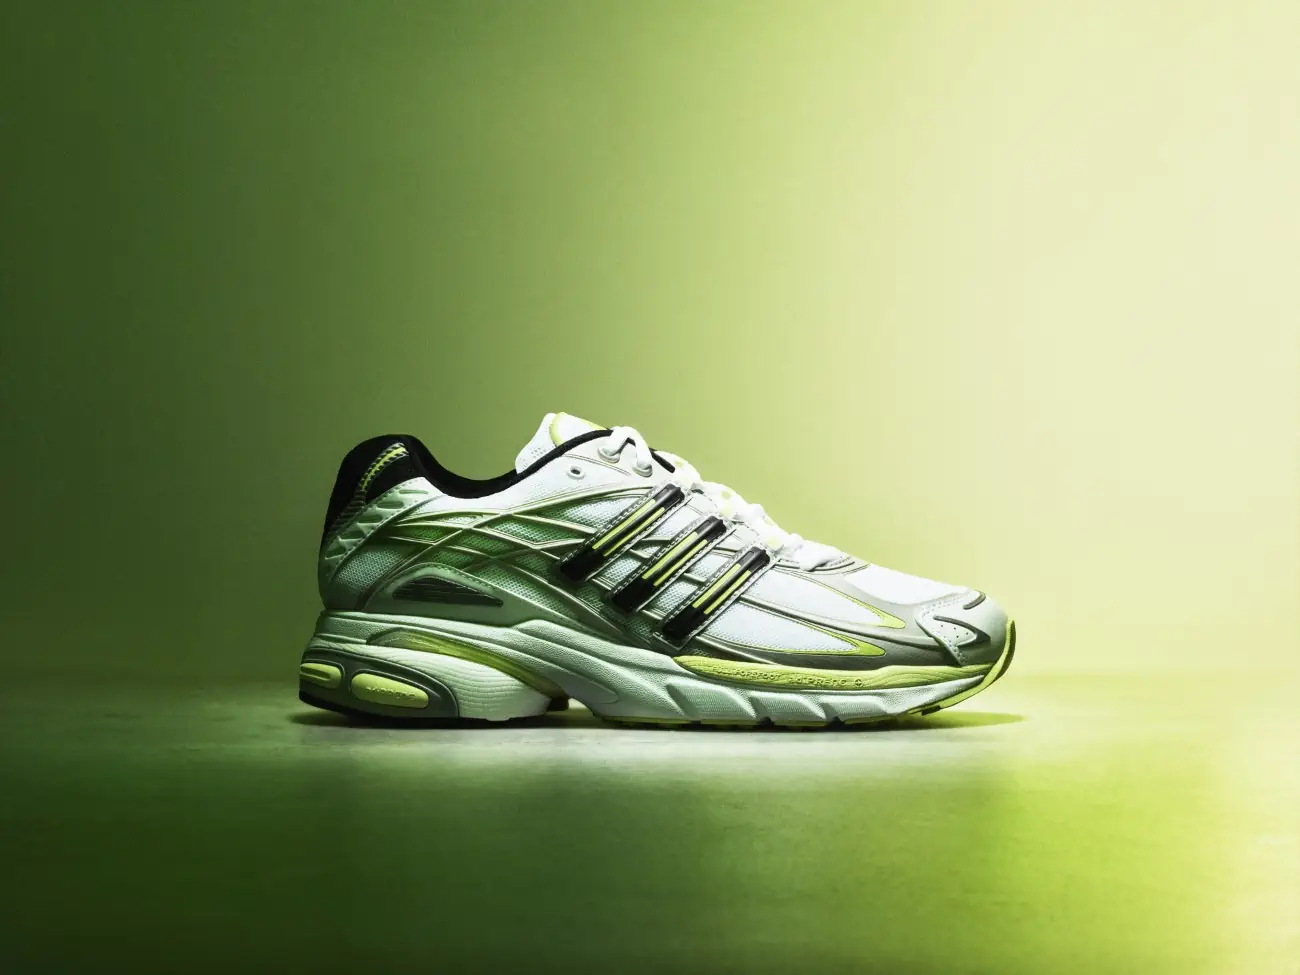 adidas Originals introduces the retro-revived ''2000 Running'' collection